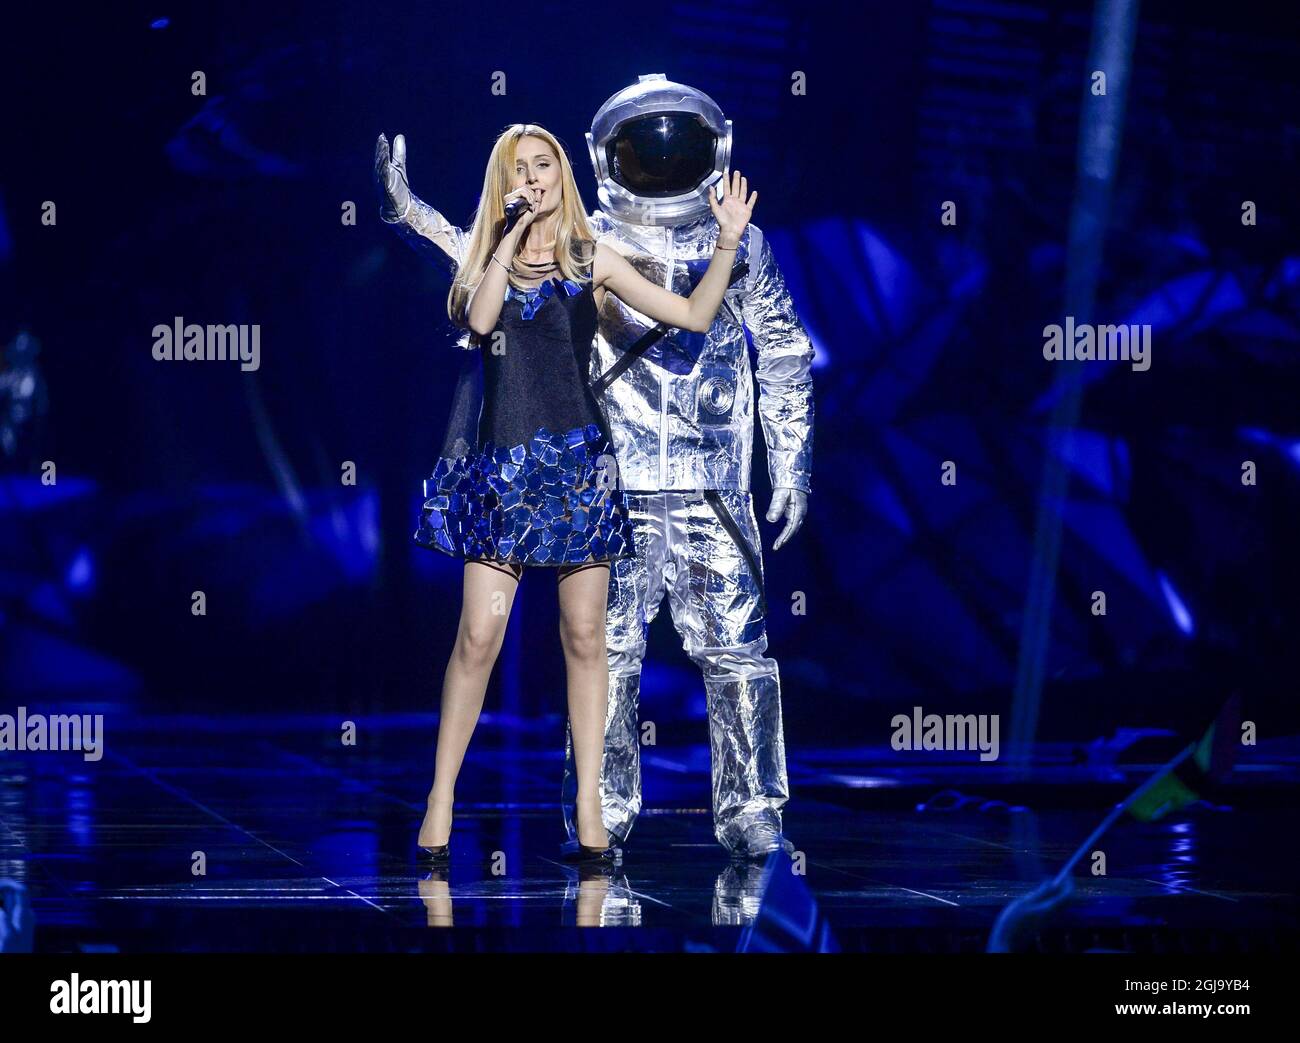 STOCKHOLM 2016-05-10 Moldova's Lidia Isac performs with the song Ã¢Â€ÂFalling StarsÃ¢Â€Â during the Eurovision Song Contest 2016 semi-final 1 at the Ericsson Globe Arena in Stockholm, Sweden, May 10, 2016. Photo: Maja Suslin / TT / Kod 10300 ** SWEDEN OUT **  Stock Photo